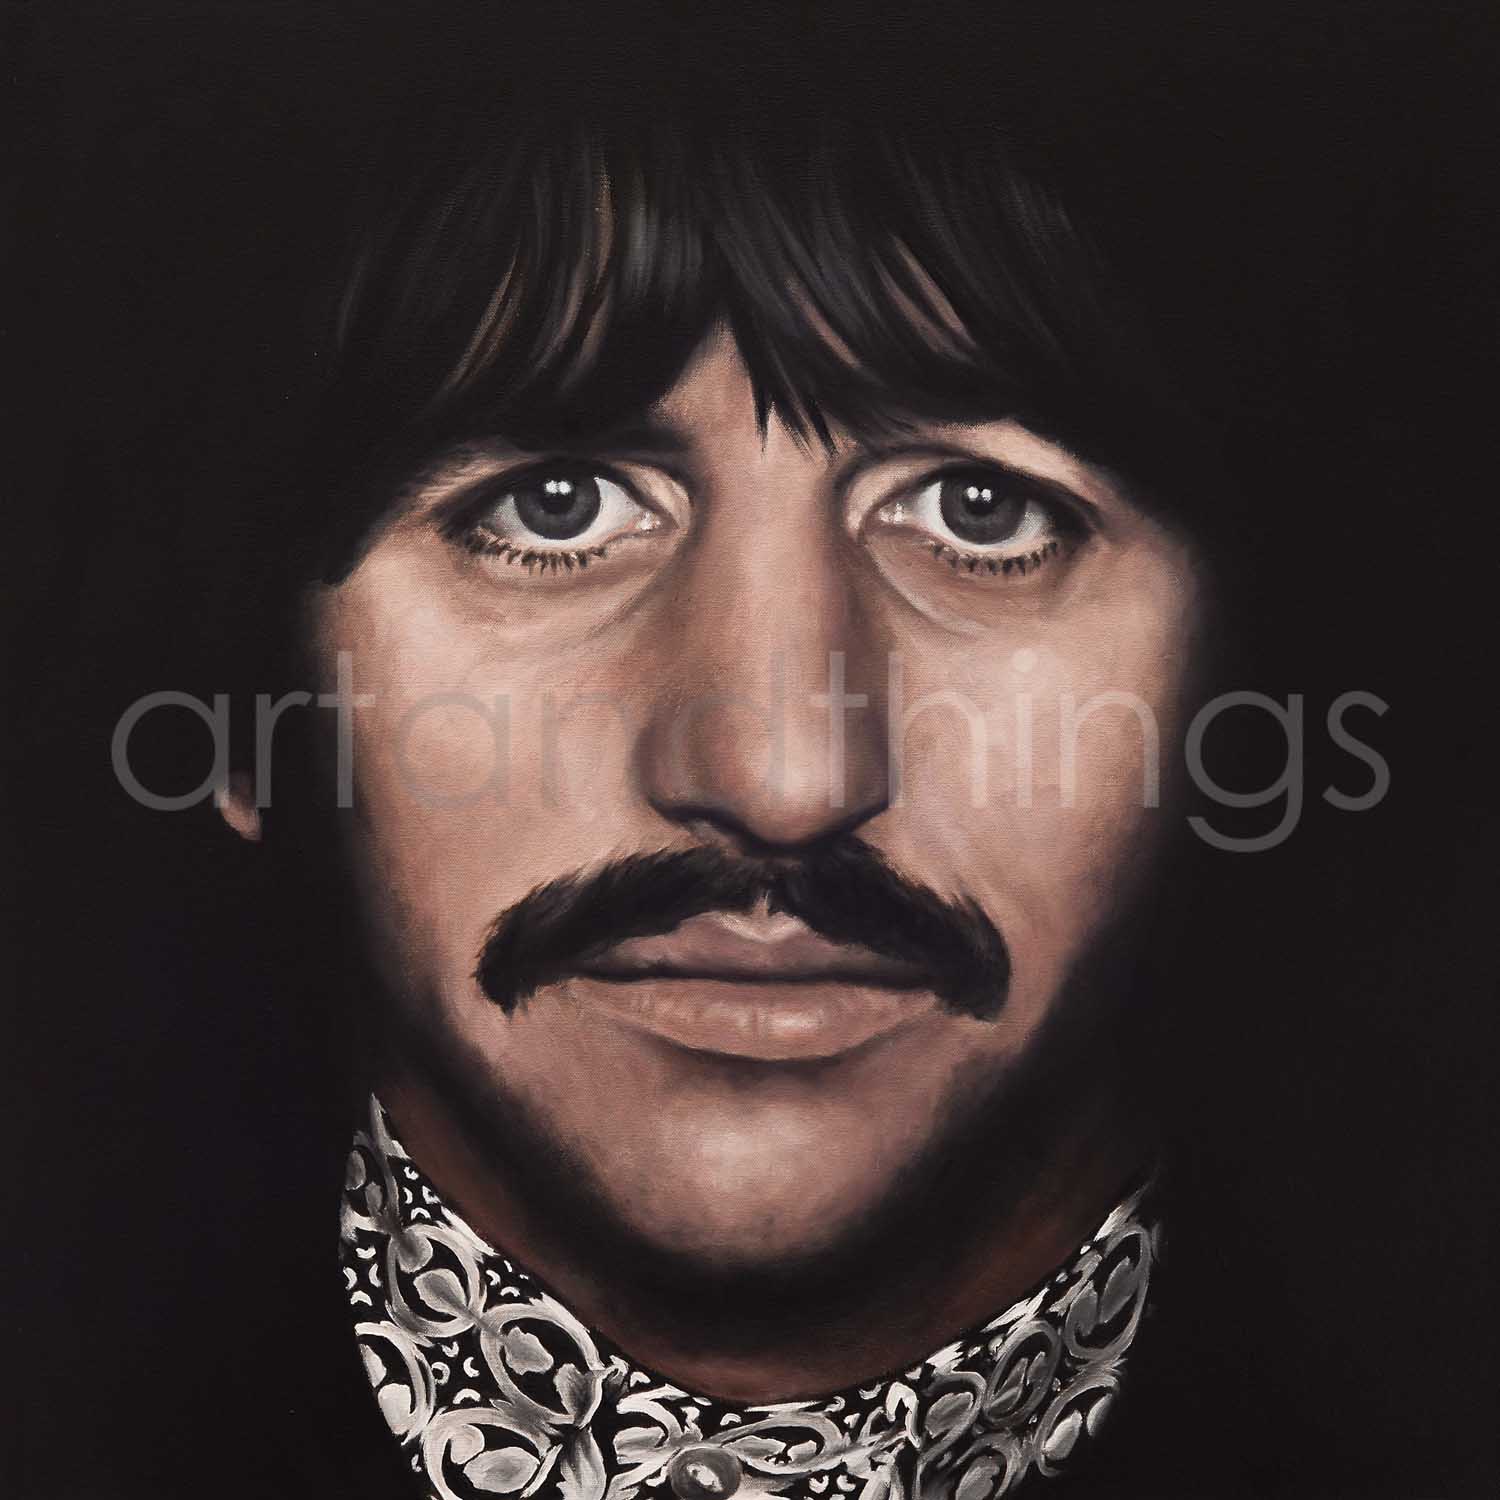 Ringo Starr Print - The Beatles Framed and Signed